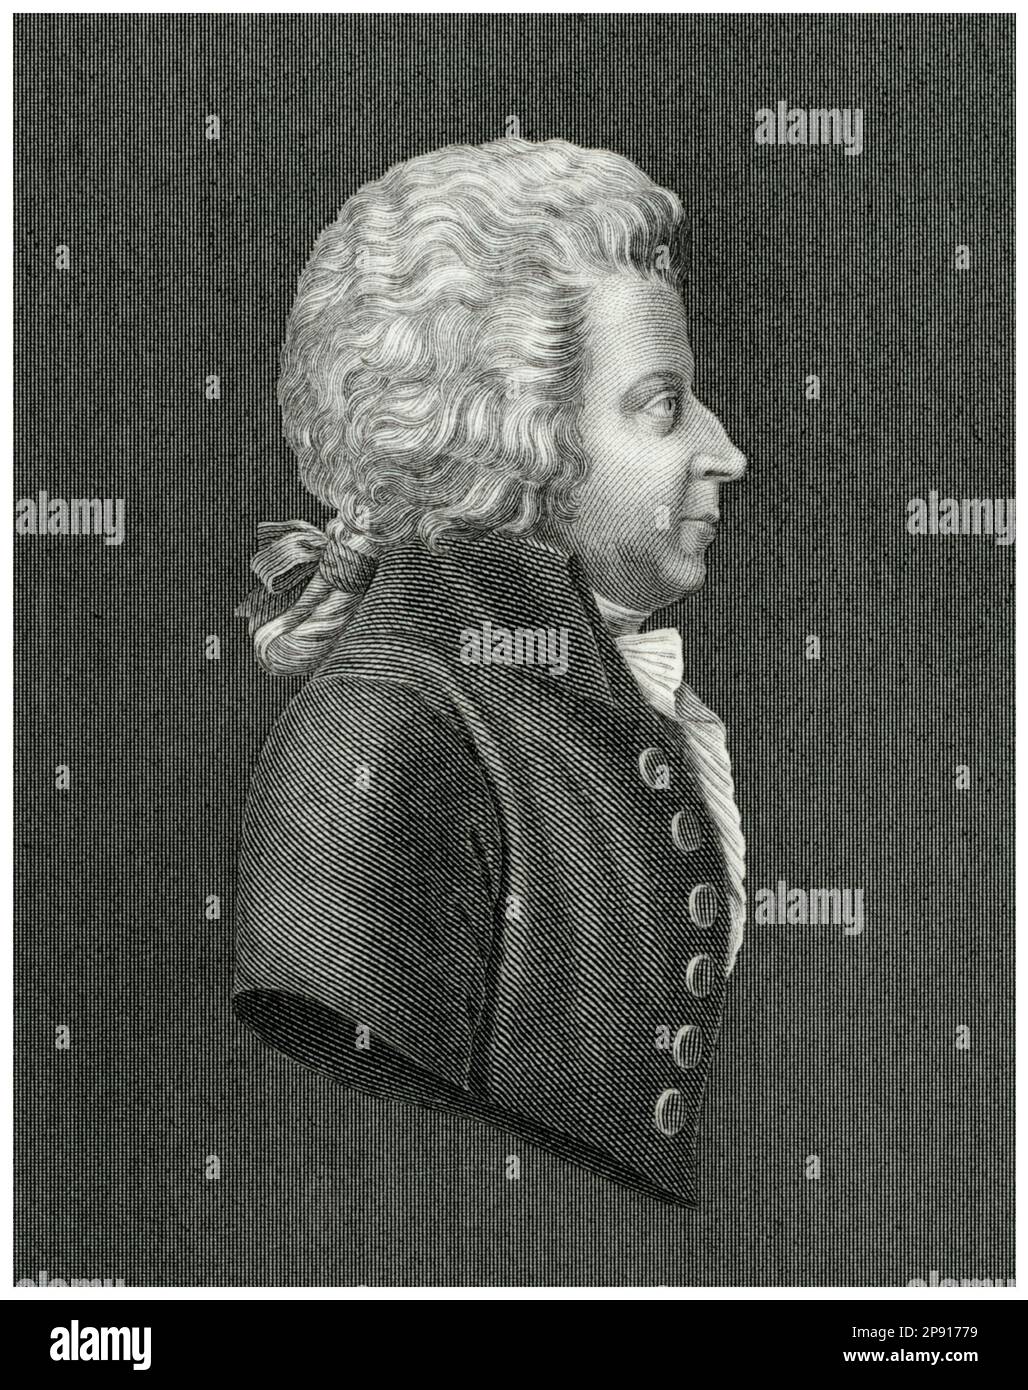 Wolfgang Amadeus Mozart (1756-1791), Composer, portrait engraving by unknown artist, before 1899 Stock Photo